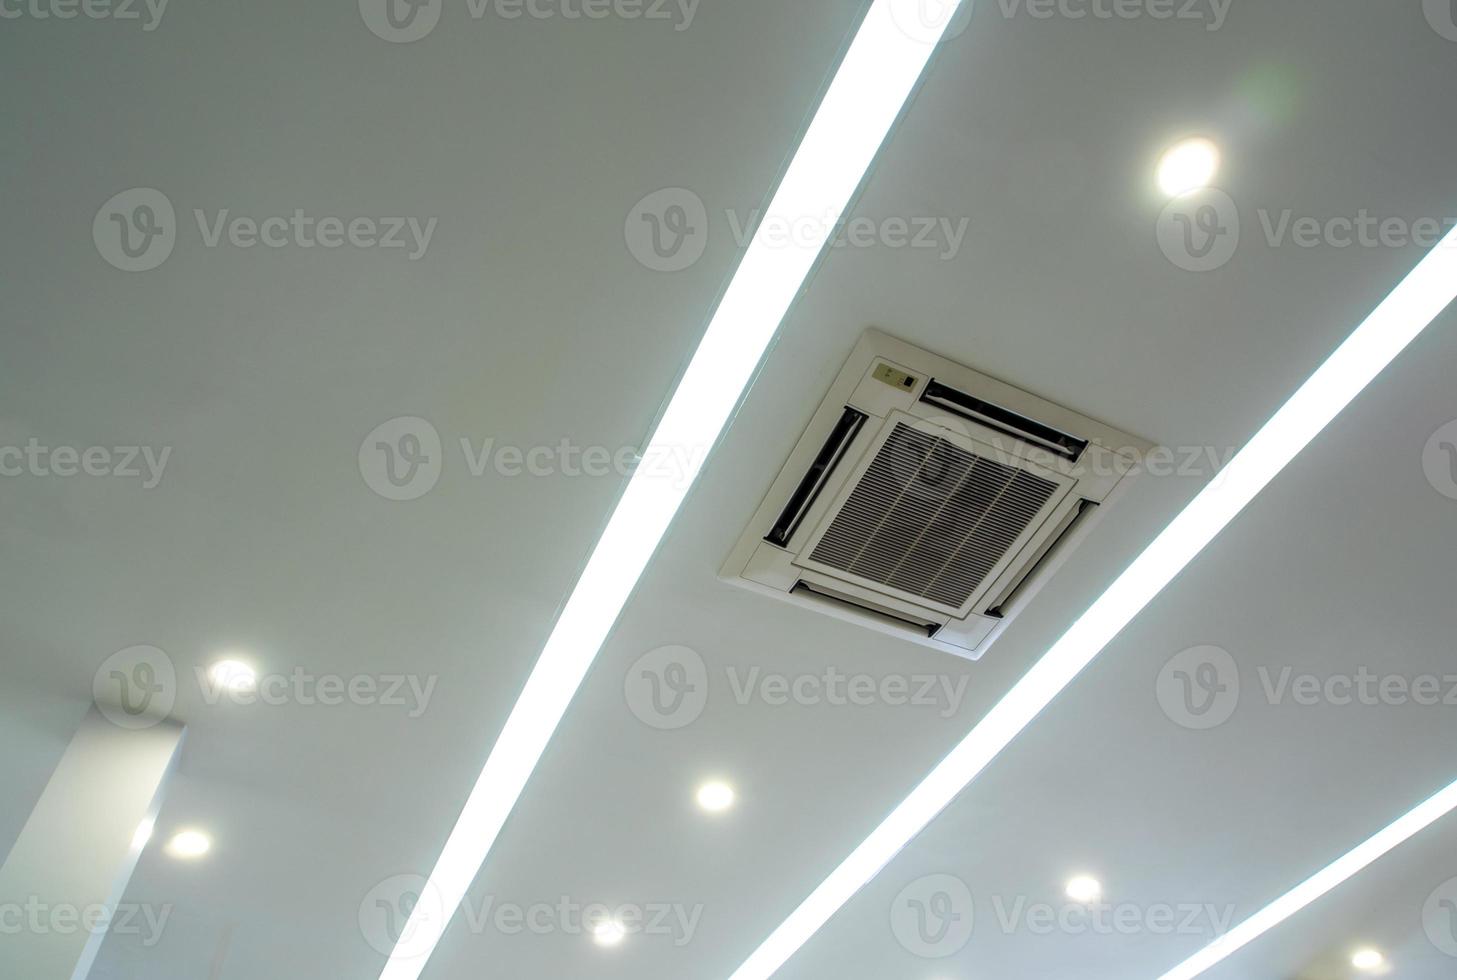 Lighting and ceiling mounted air conditioner photo